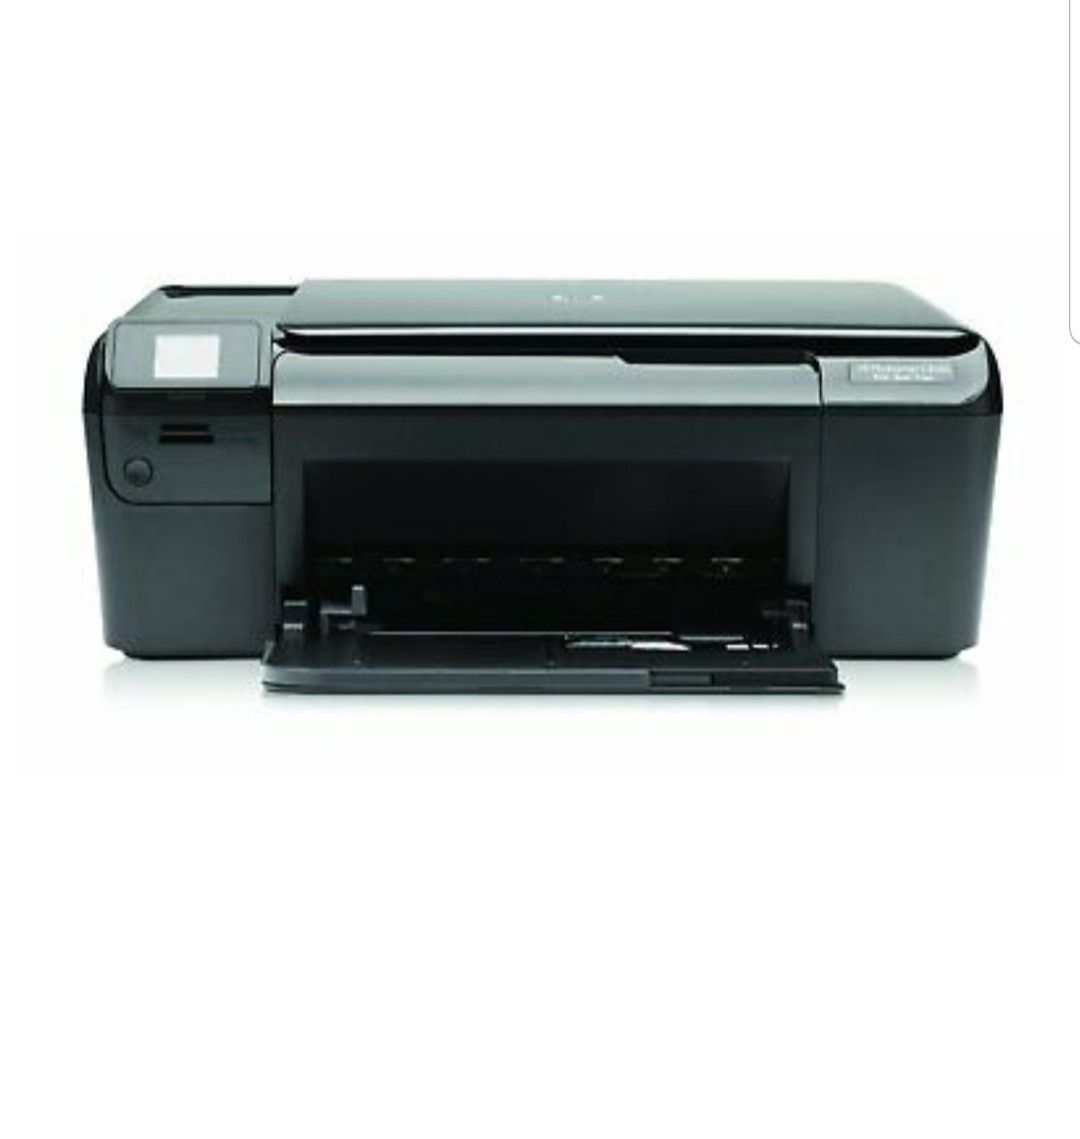 Hp photo c4680 all in one printer